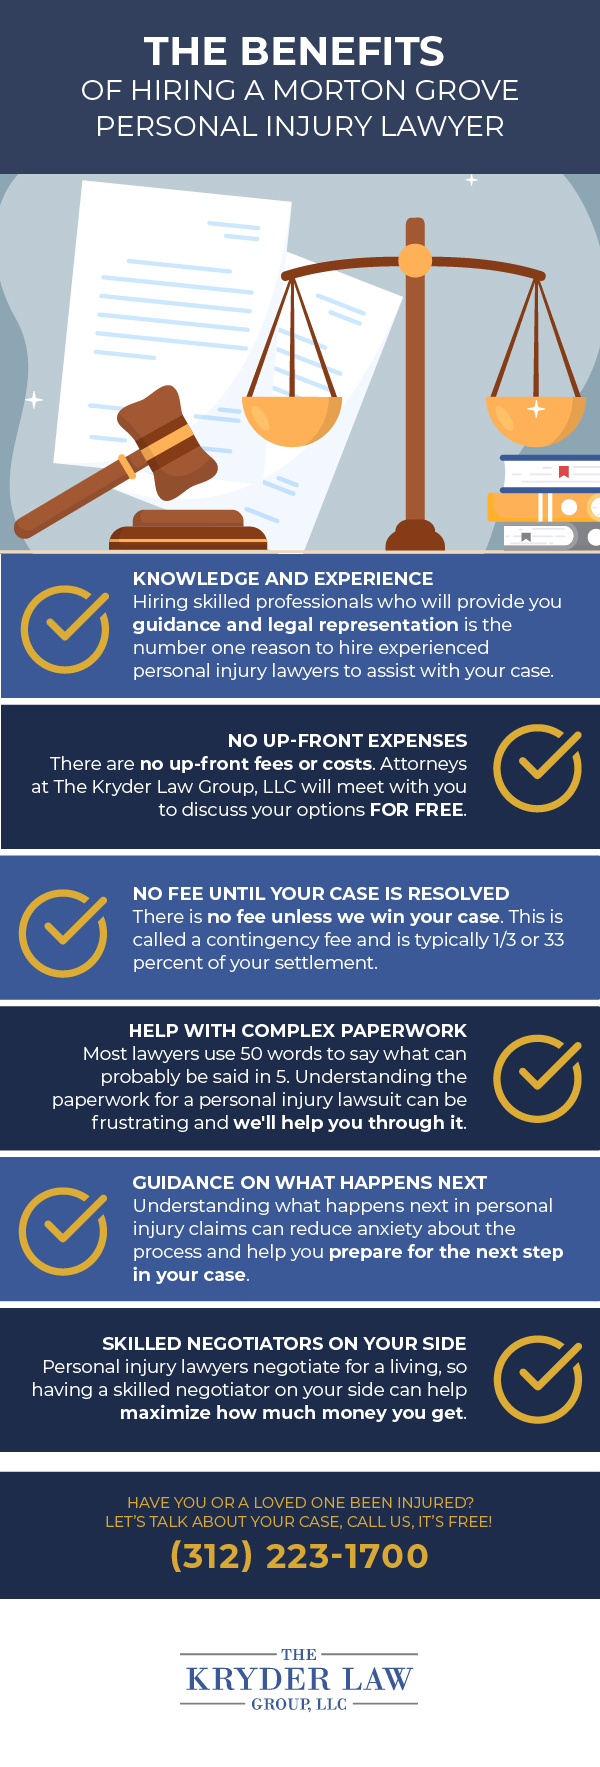 The Benefits of Hiring a Morton Grove Personal Injury Lawyer Infographic